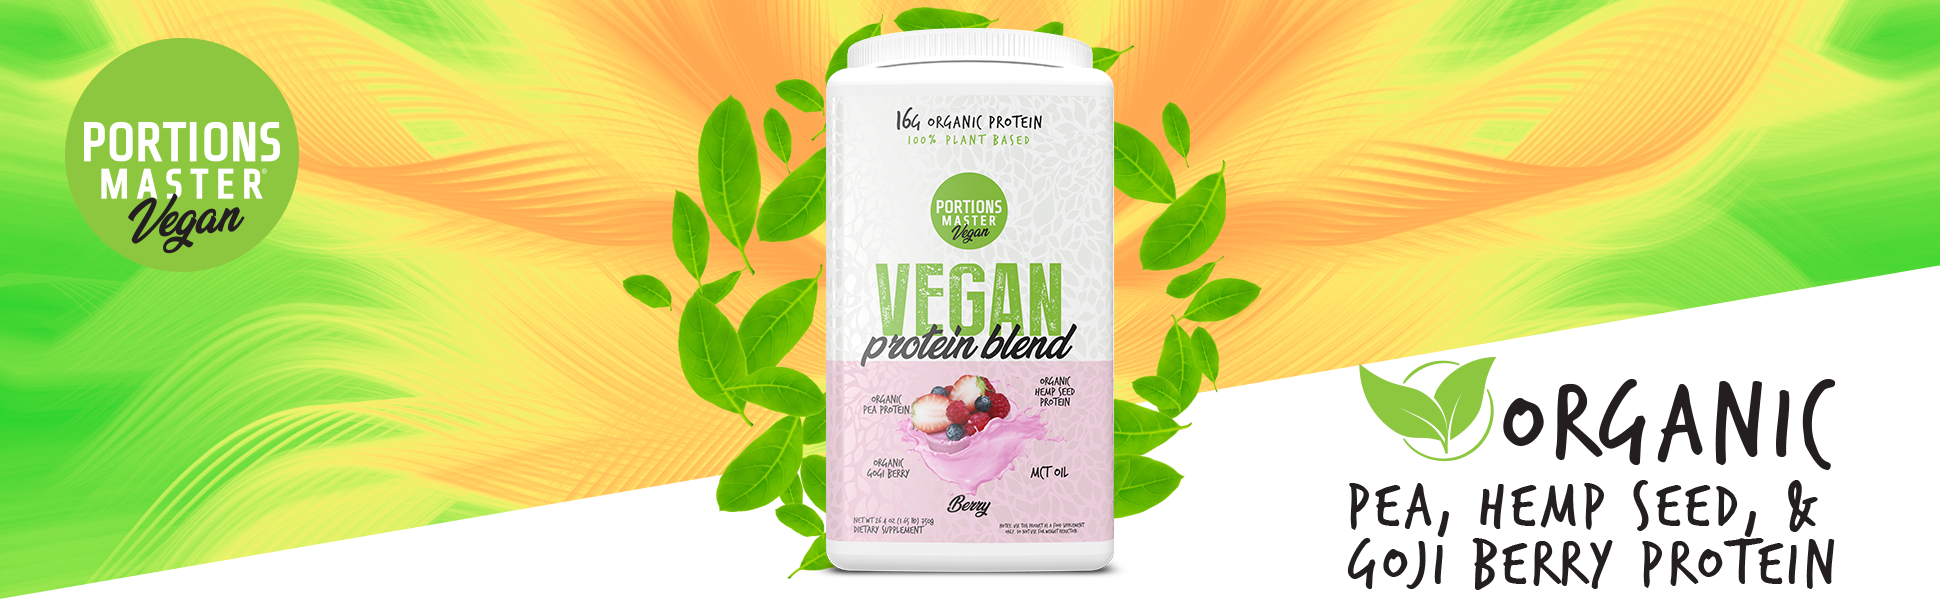 Berry Protein Blend Banner